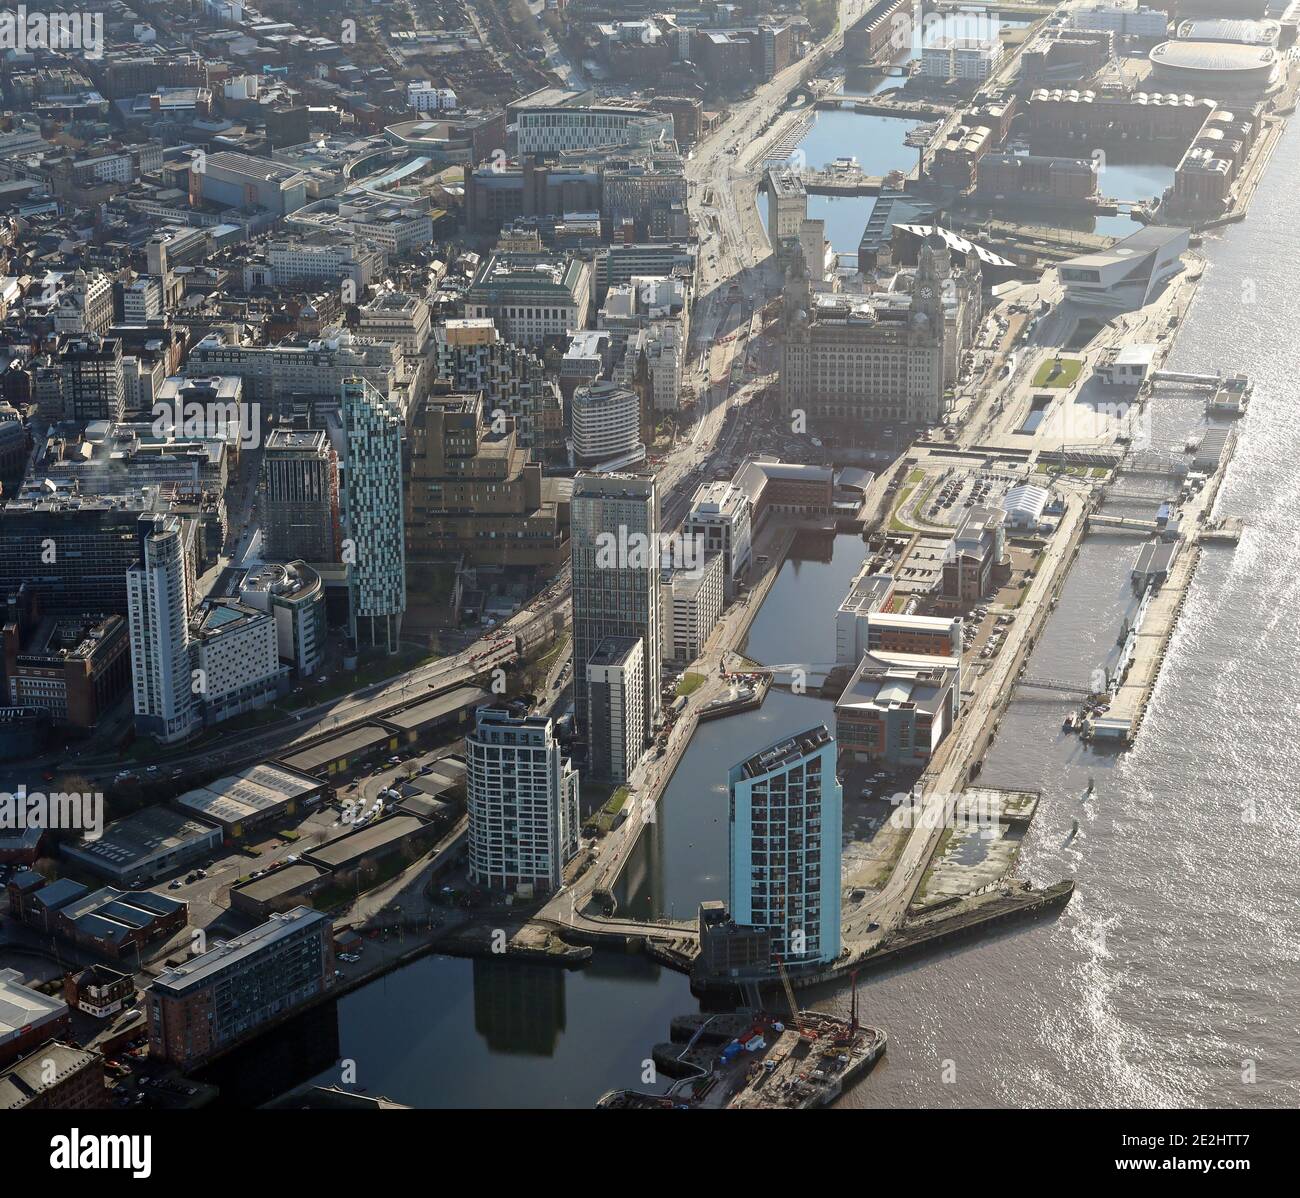 Aerial view of Princes Dock, Liverpool looking south towards The Royal Liver Building, Cunard Building, and the Port of Liverpool Building. Stock Photo